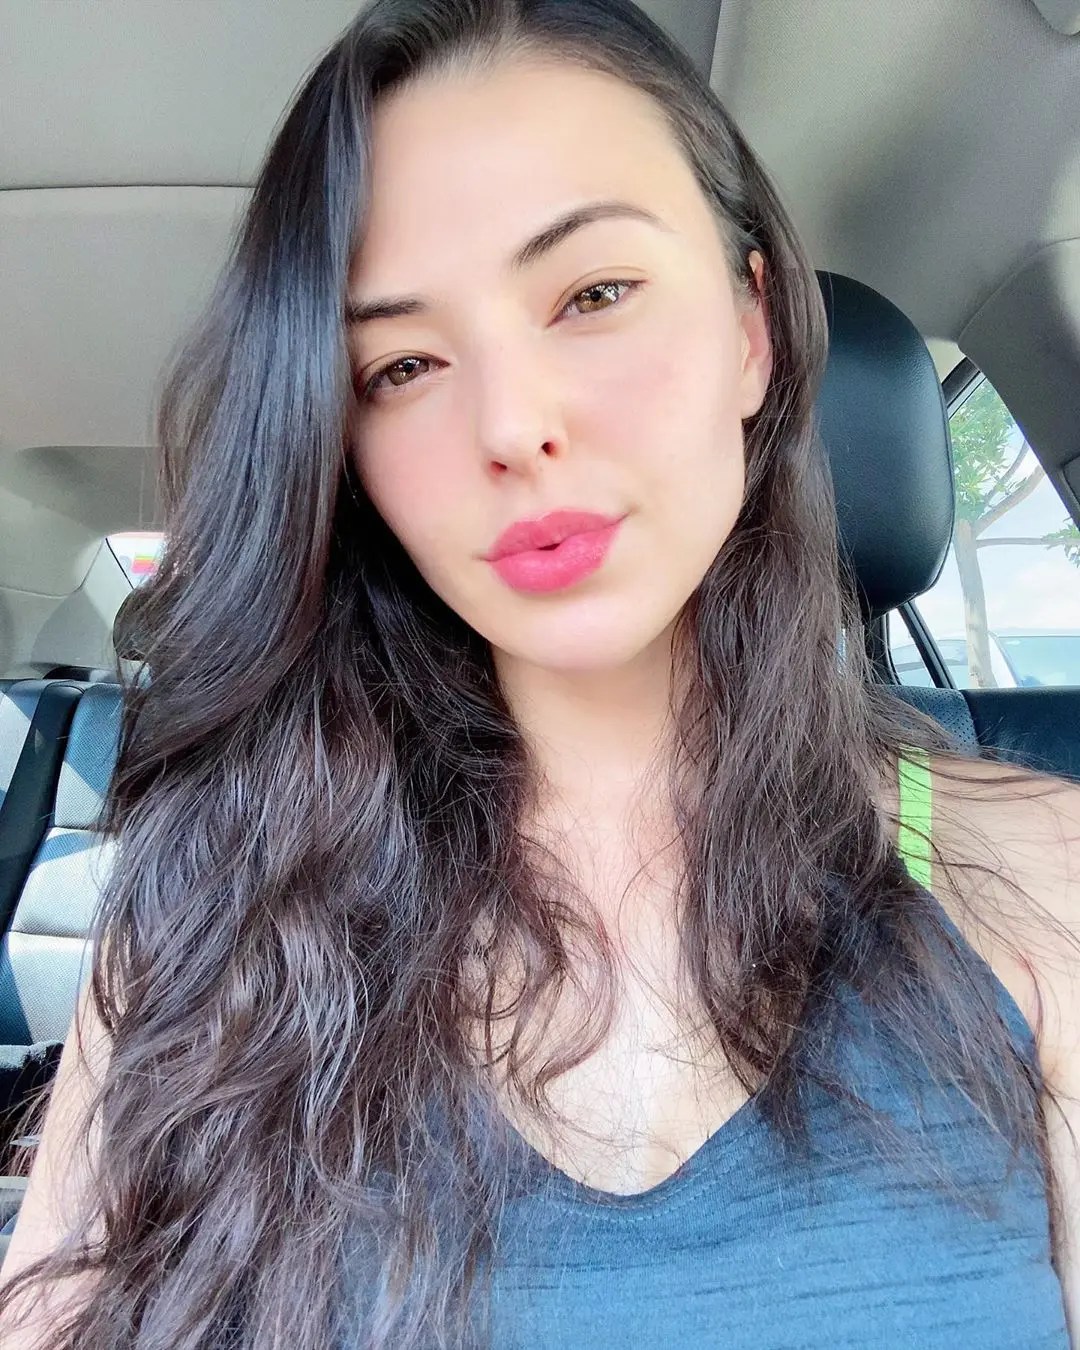 Hip hop has been part of my life since I can remember – Lalla Hirayama